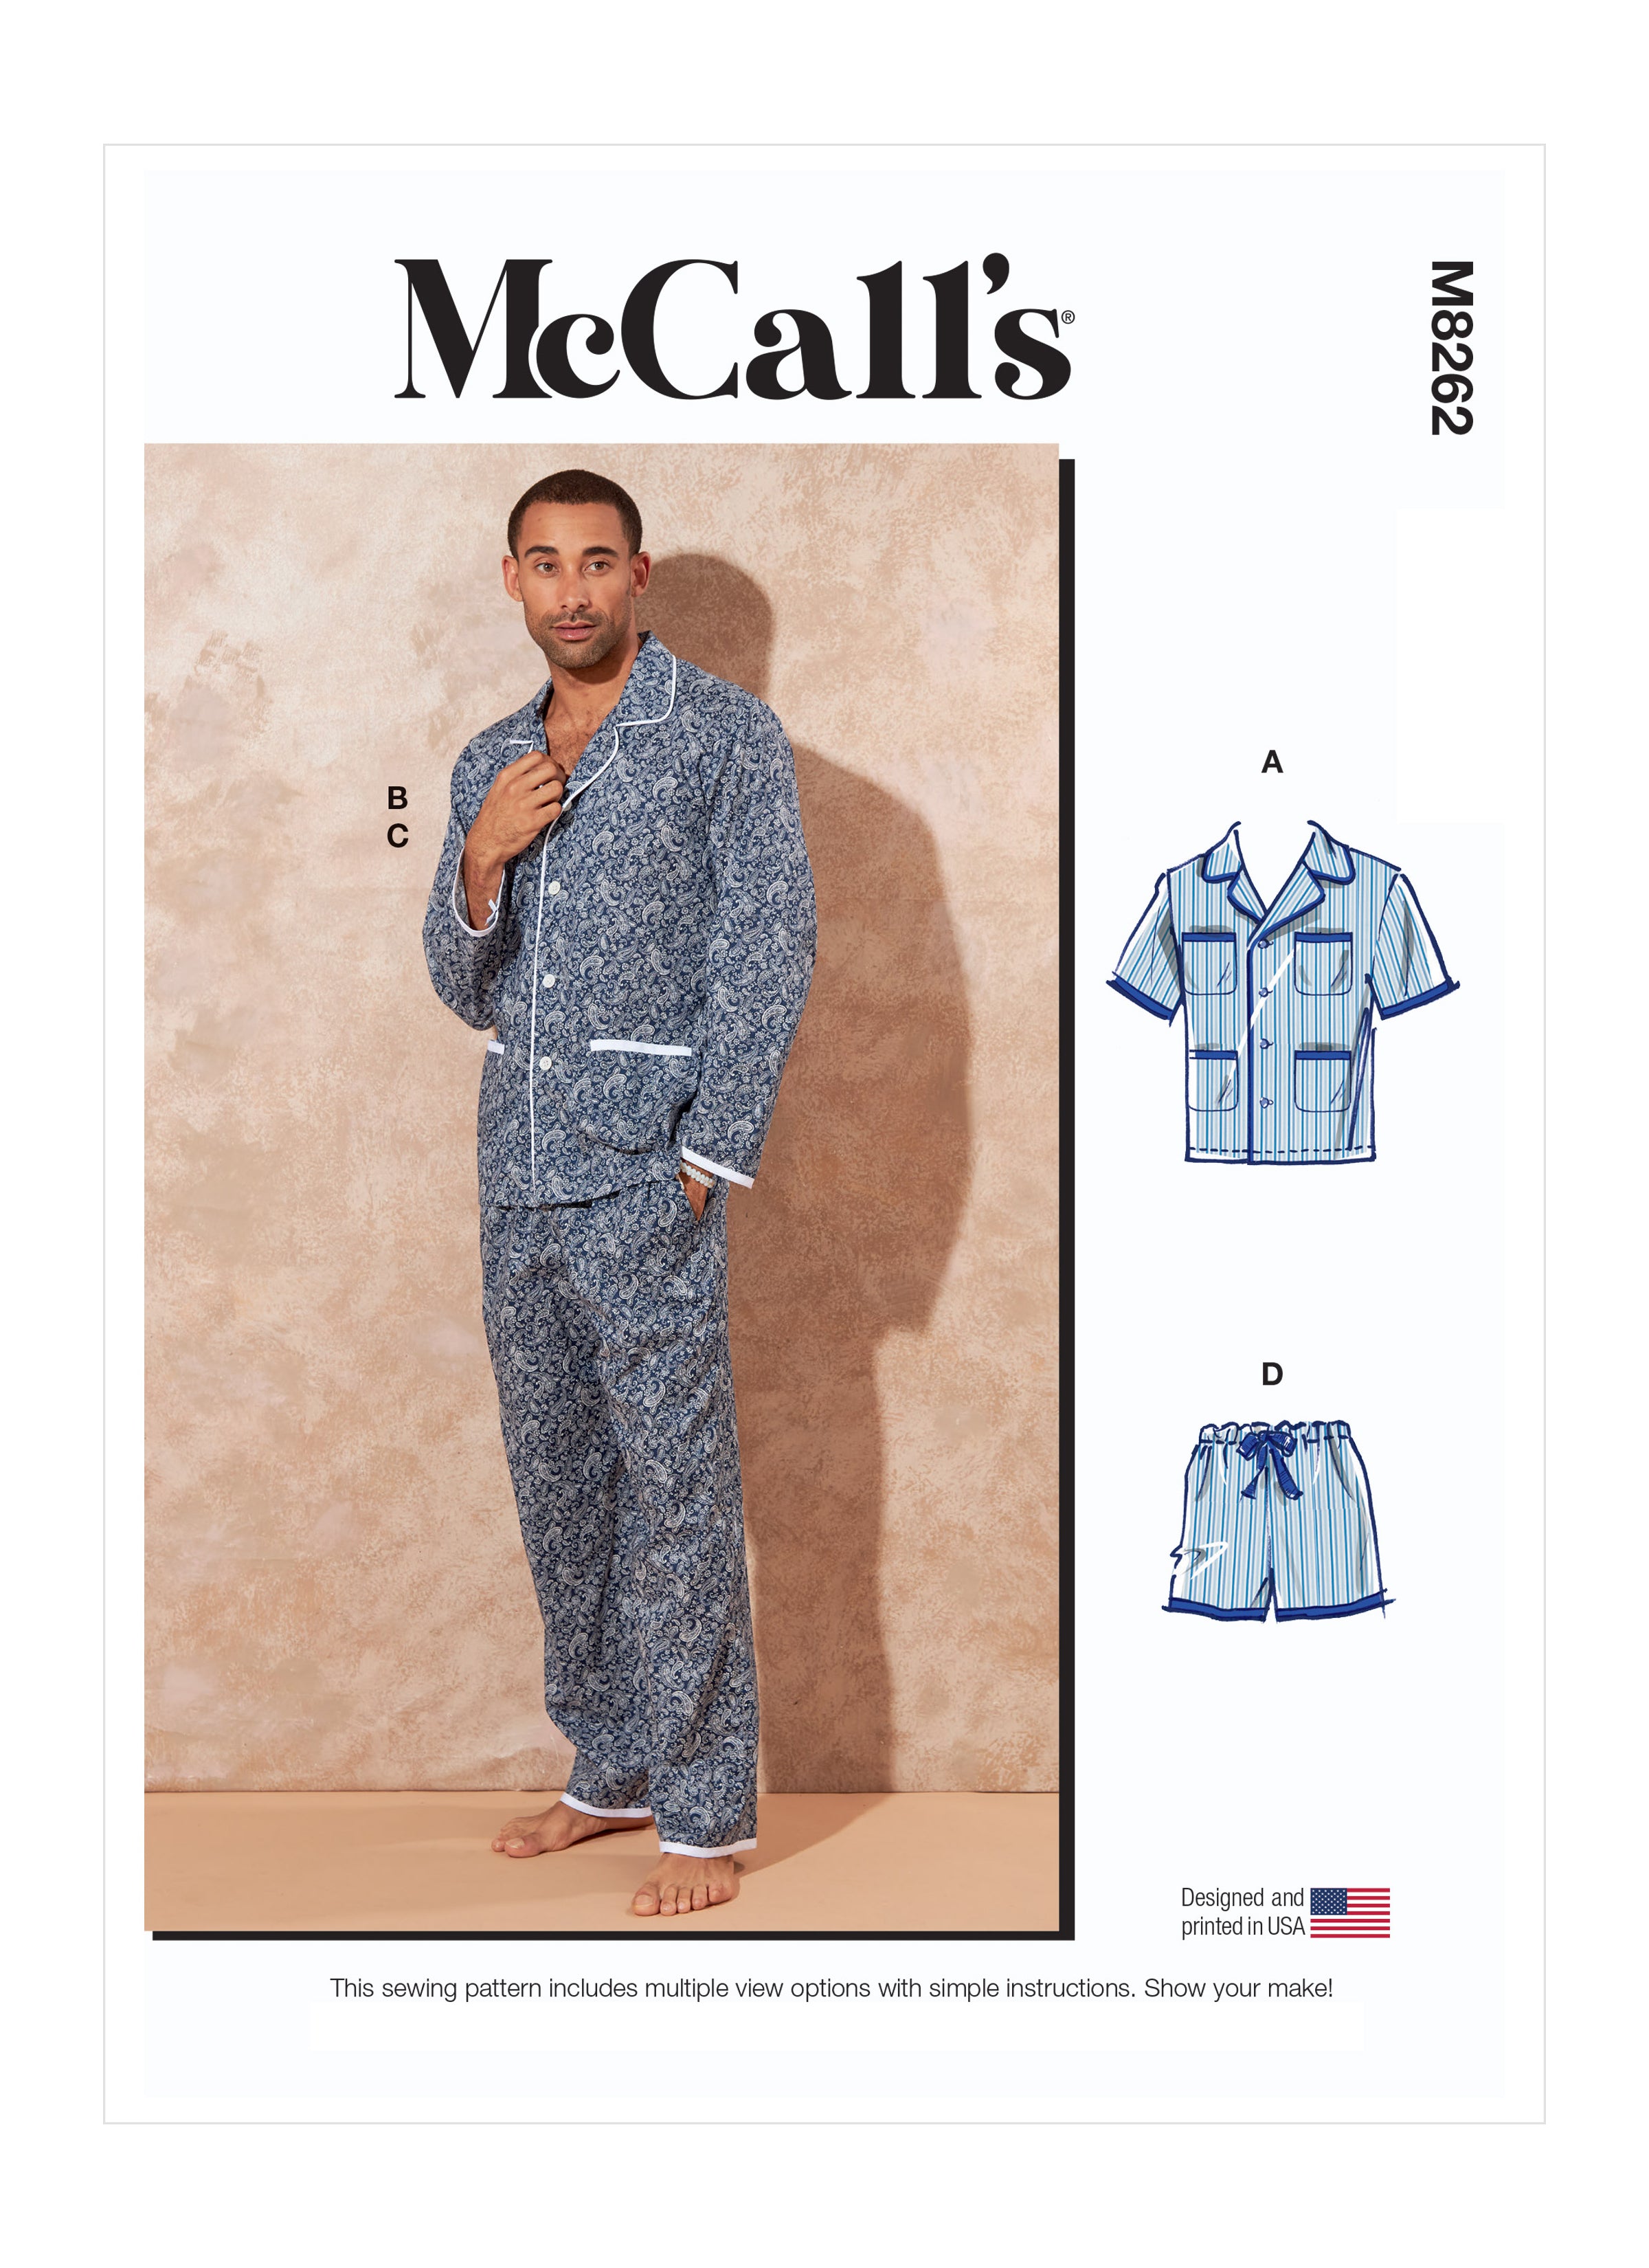 McCall's Sewing Pattern 8262 Men's Pyjamas from Jaycotts Sewing Supplies